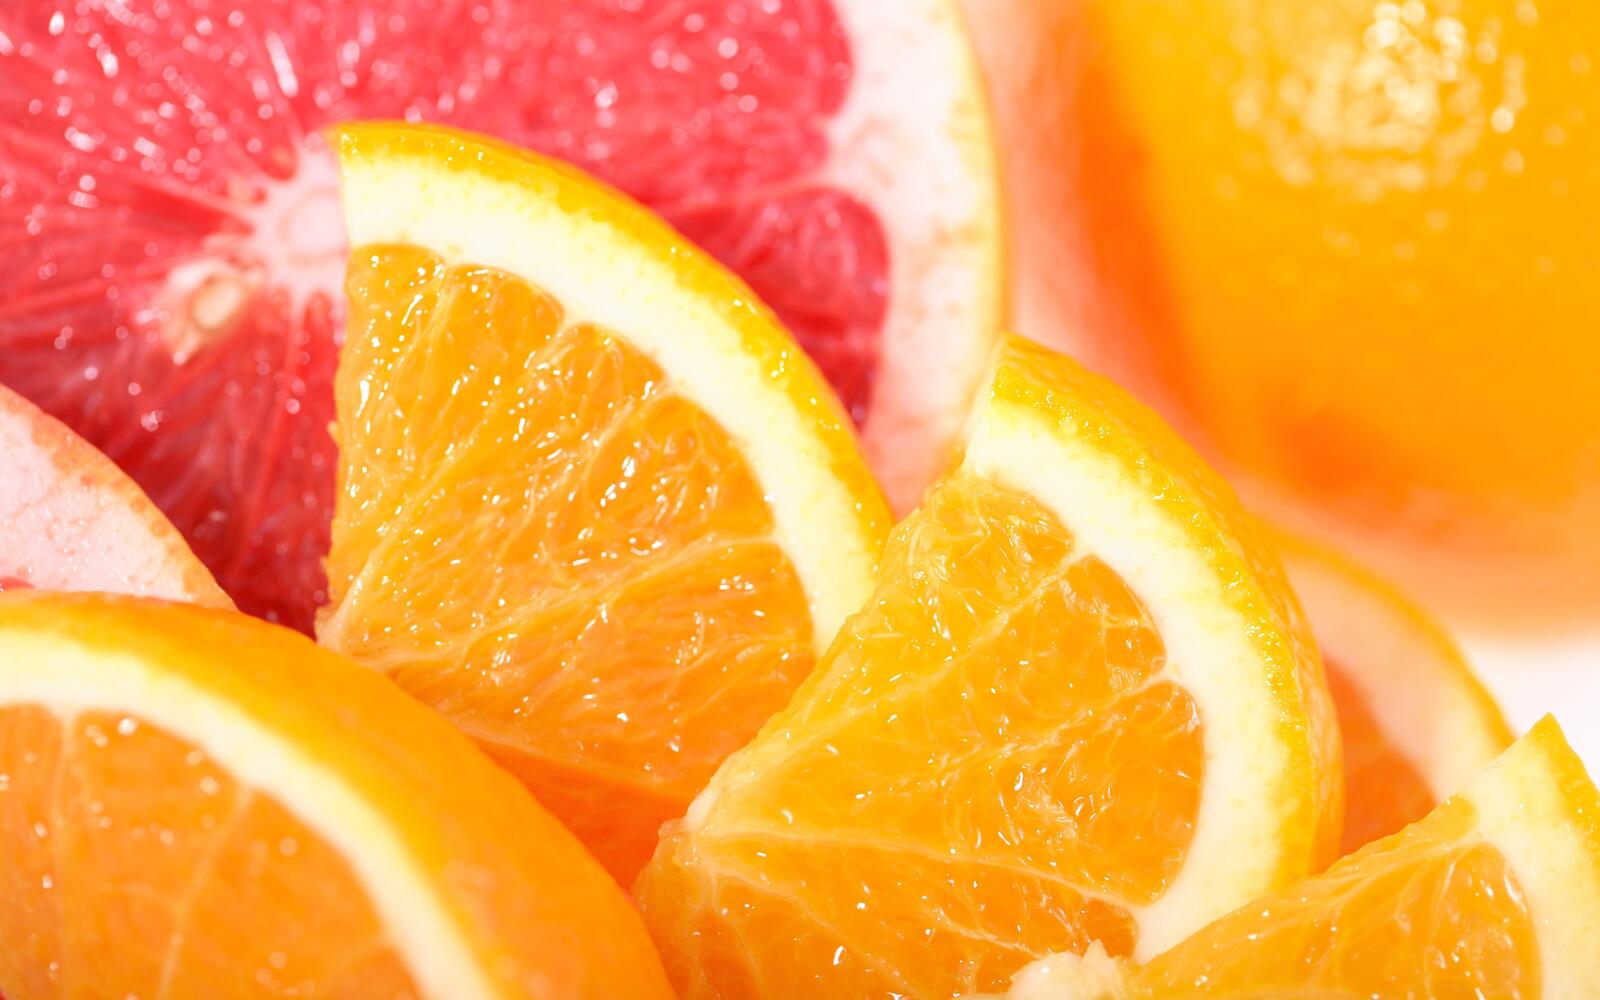 Wallpapers slices orange sweet and sour on the desktop